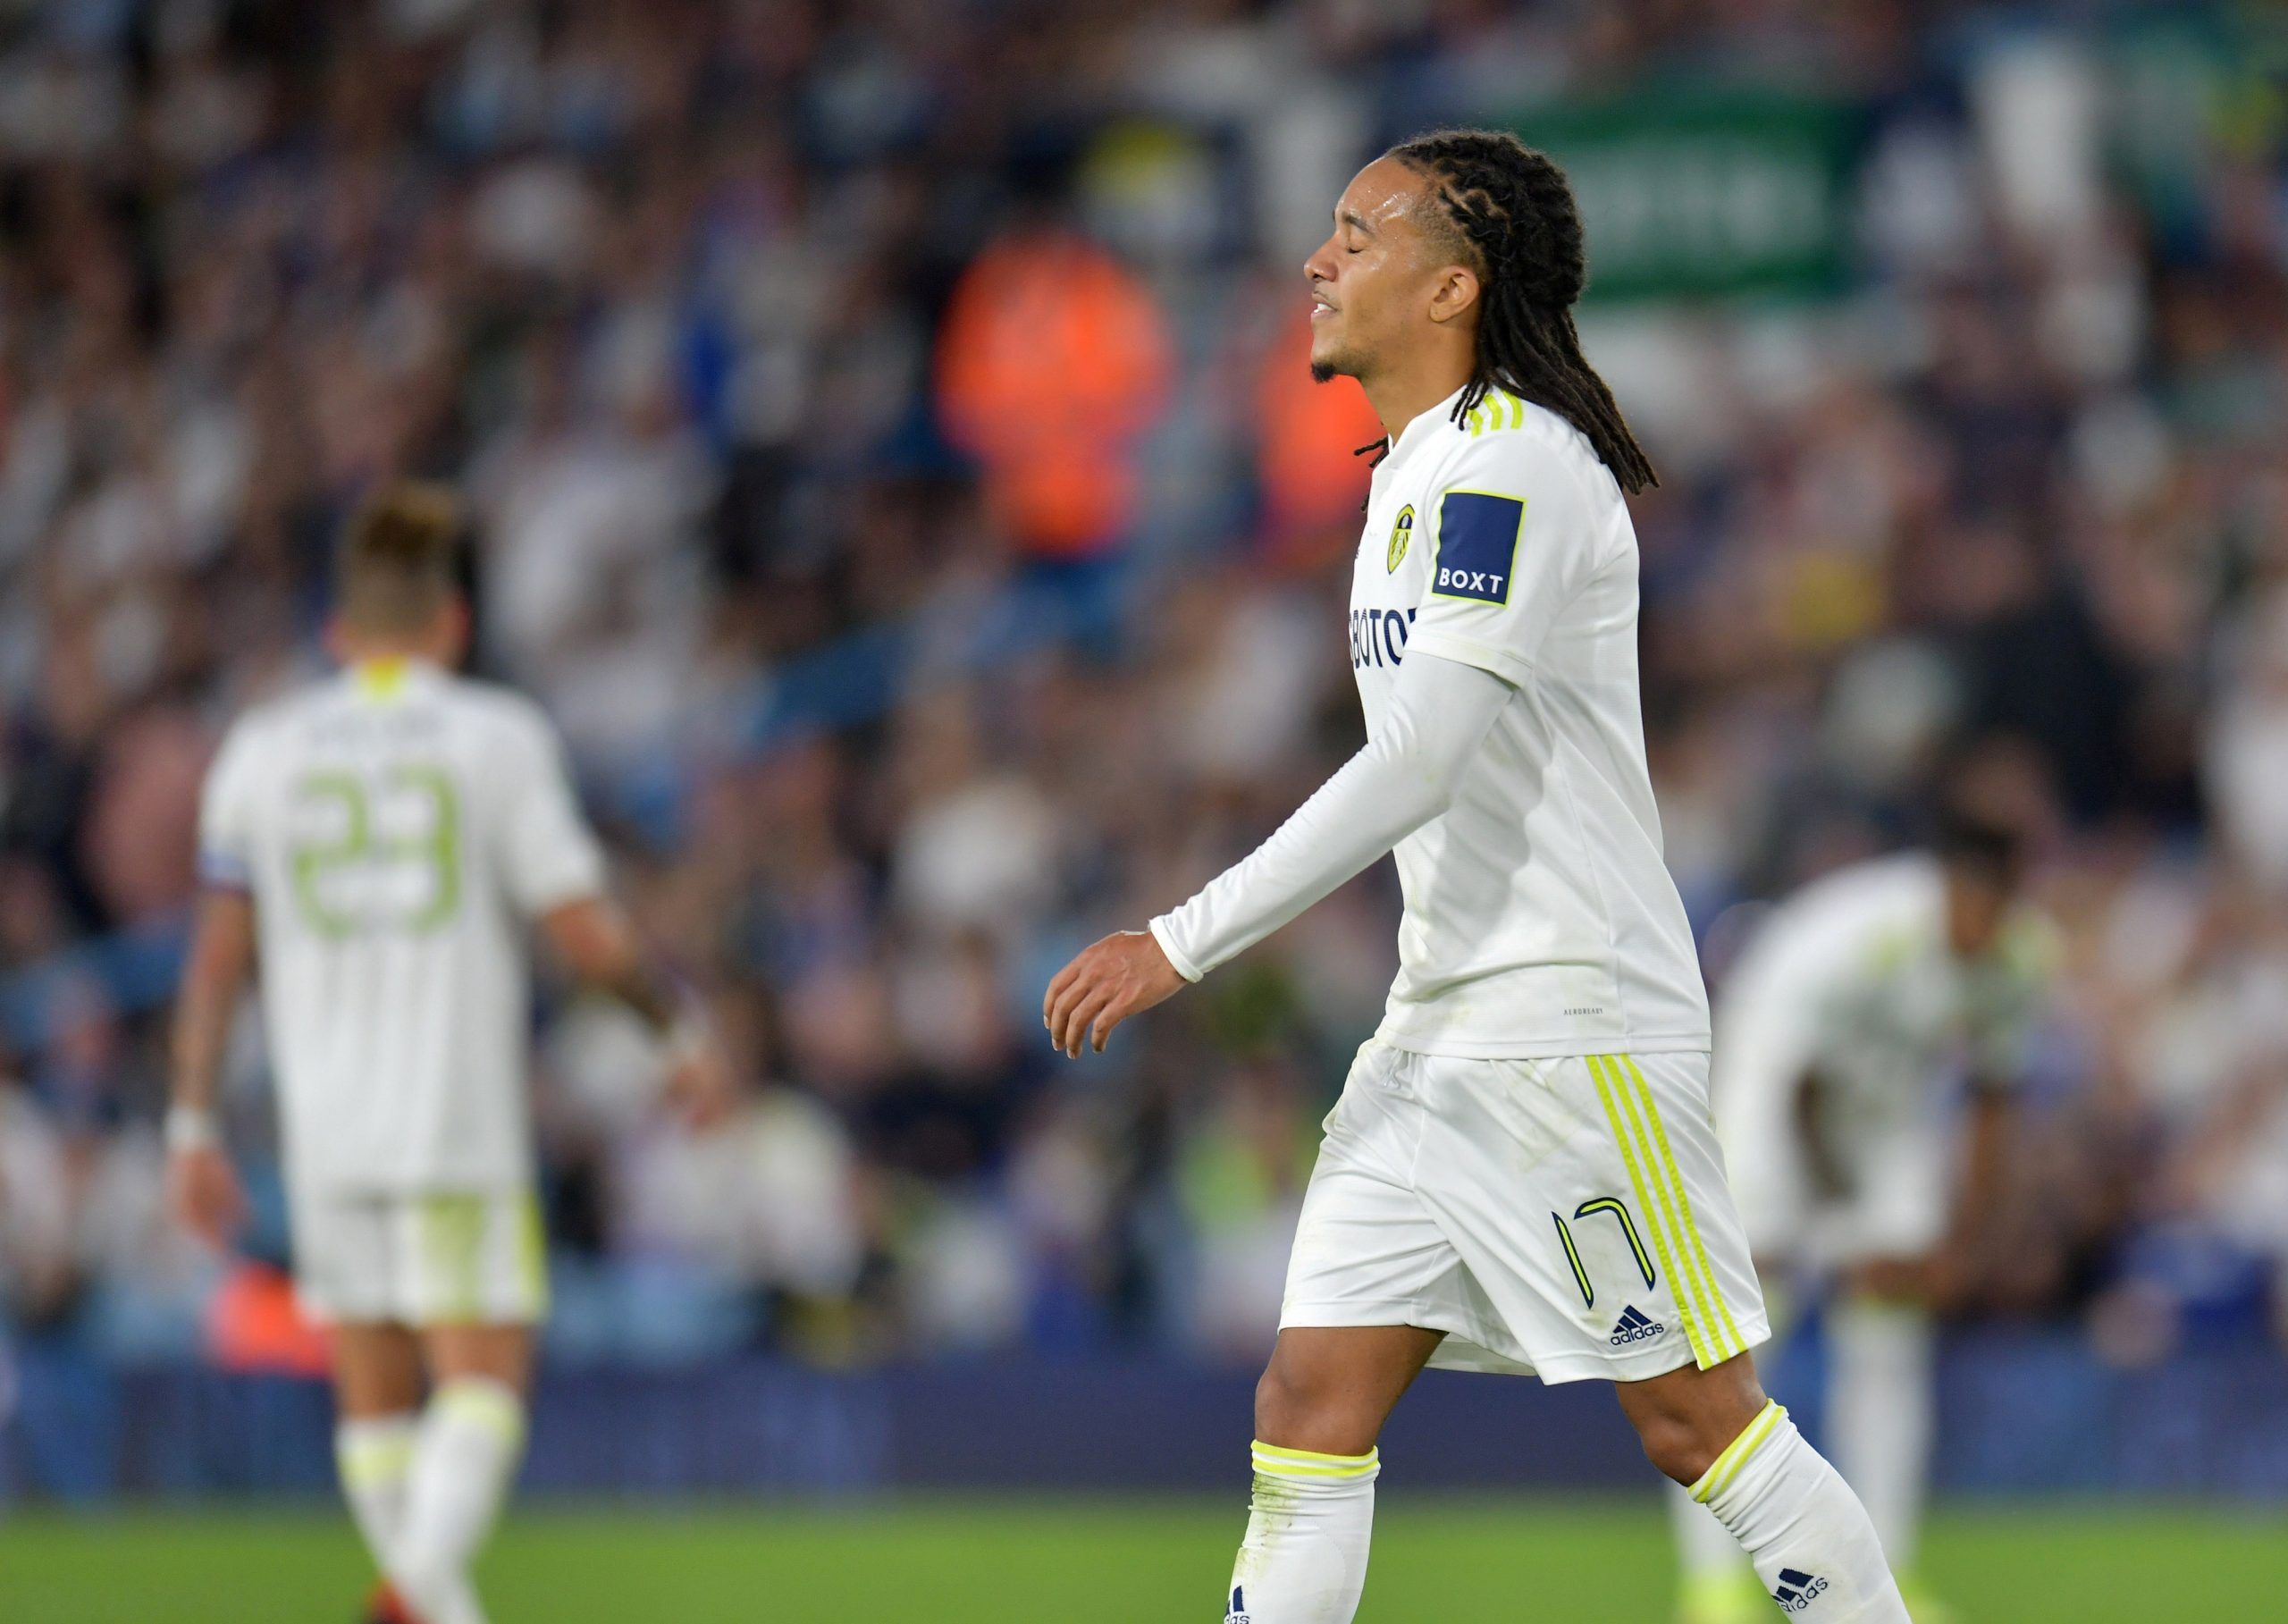 Soccer - England - Carabao Cup Second Round - Leeds United v Crewe Alexandra - Elland Road, Leeds, Britain - August 24, 2021  Leeds United's Helder Costa reacts  Action Images via Reuters/Paul Burrows